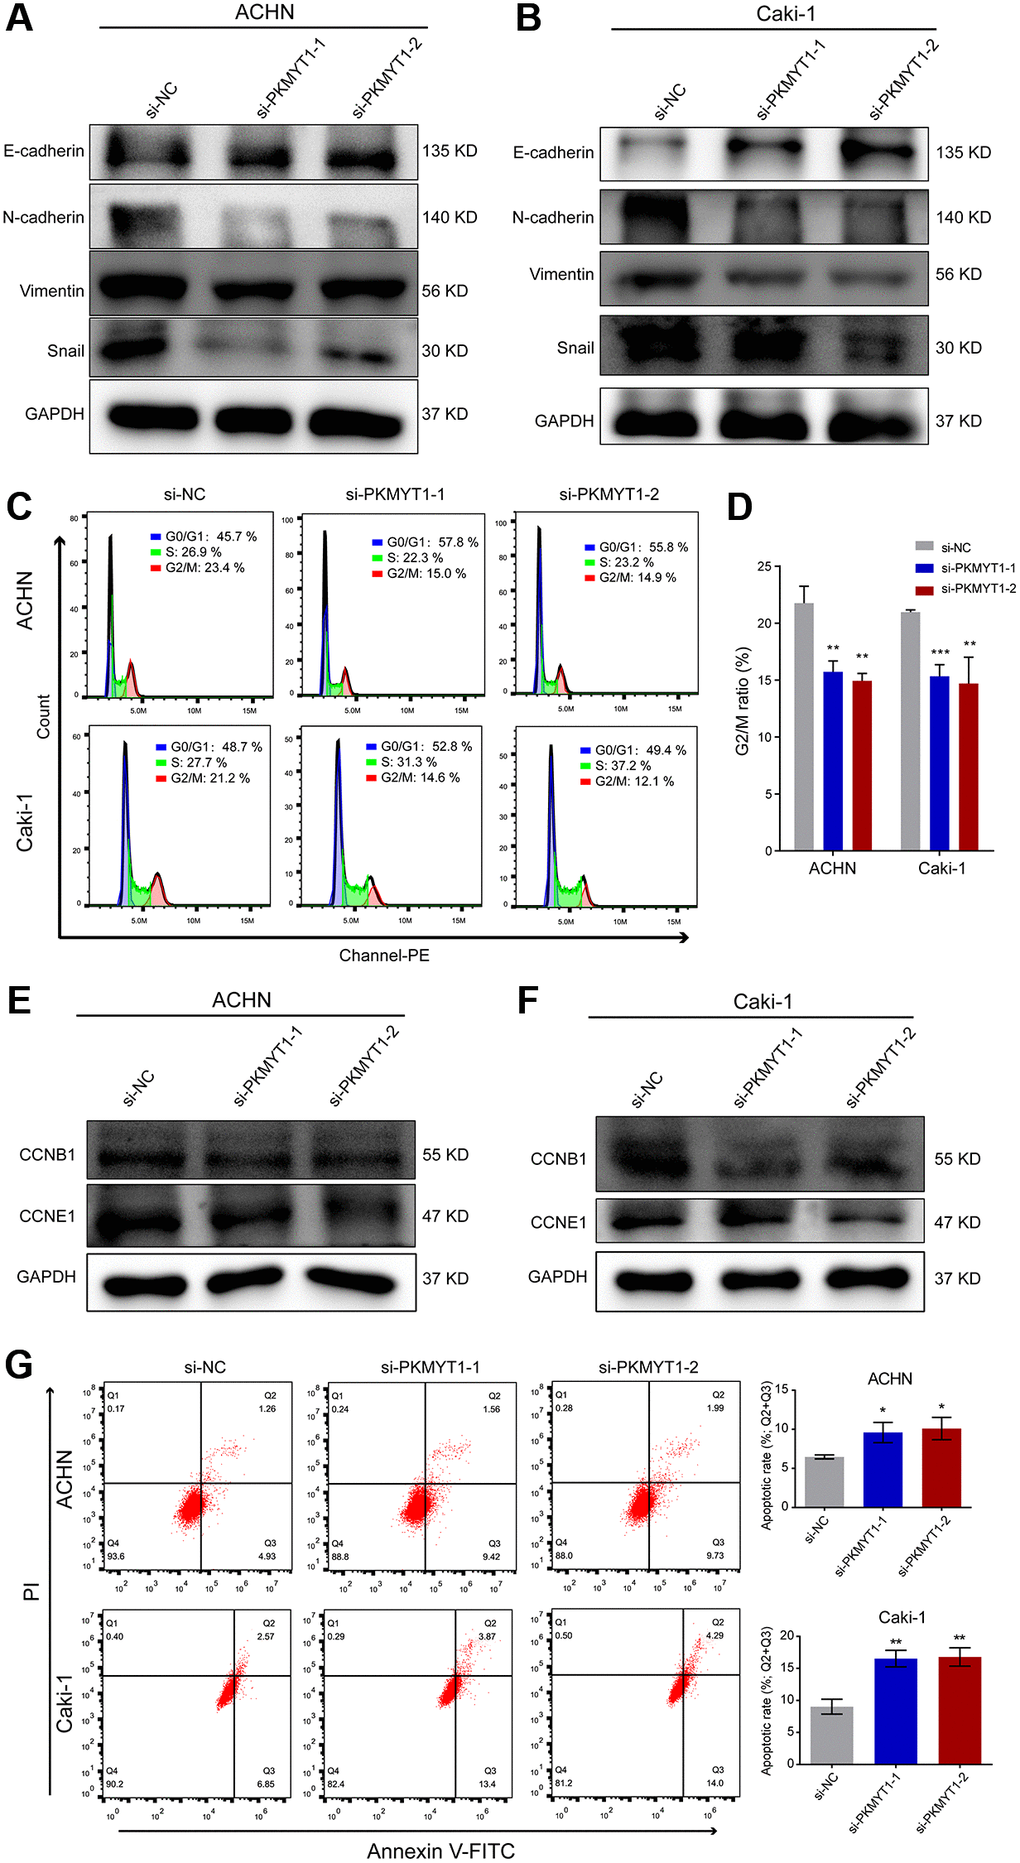 Downregulation of PKMYT1 inhibits epithelial-mesenchymal transition (EMT), promotes apoptosis, and decreases the G2/M ratio in the cell cycle. (A–B) Western blot analysis showing changes in EMT-related biomarkers in the ACHN and Caki-1 cell lines. Expression of E-cadherin was increased in the siRNA groups, while expression of N-cadherin, Vimentin, and Snail was decreased. (C) Representative images of flow cytometry results for the cell cycle in ACHN and Caki-1 cells. (D) Results showing reduction of G2/M ratio in cell cycle of ACHN and Caki-1 cells transfected with PKMYT1 siRNA versus a negative-control siRNA. (E–F) Western blot analysis of the protein expression levels of CCNB1 and CCND1 in ACHN and Caki-1 cell lines transfected with a negative-control siRNA or PKMYT1 siRNA. (G) Flow cytometry showing that inhibiting the expression of PKMYT1 contributed to a high apoptosis rate in ACHN and Caki-1 cells. *P **P ***P 